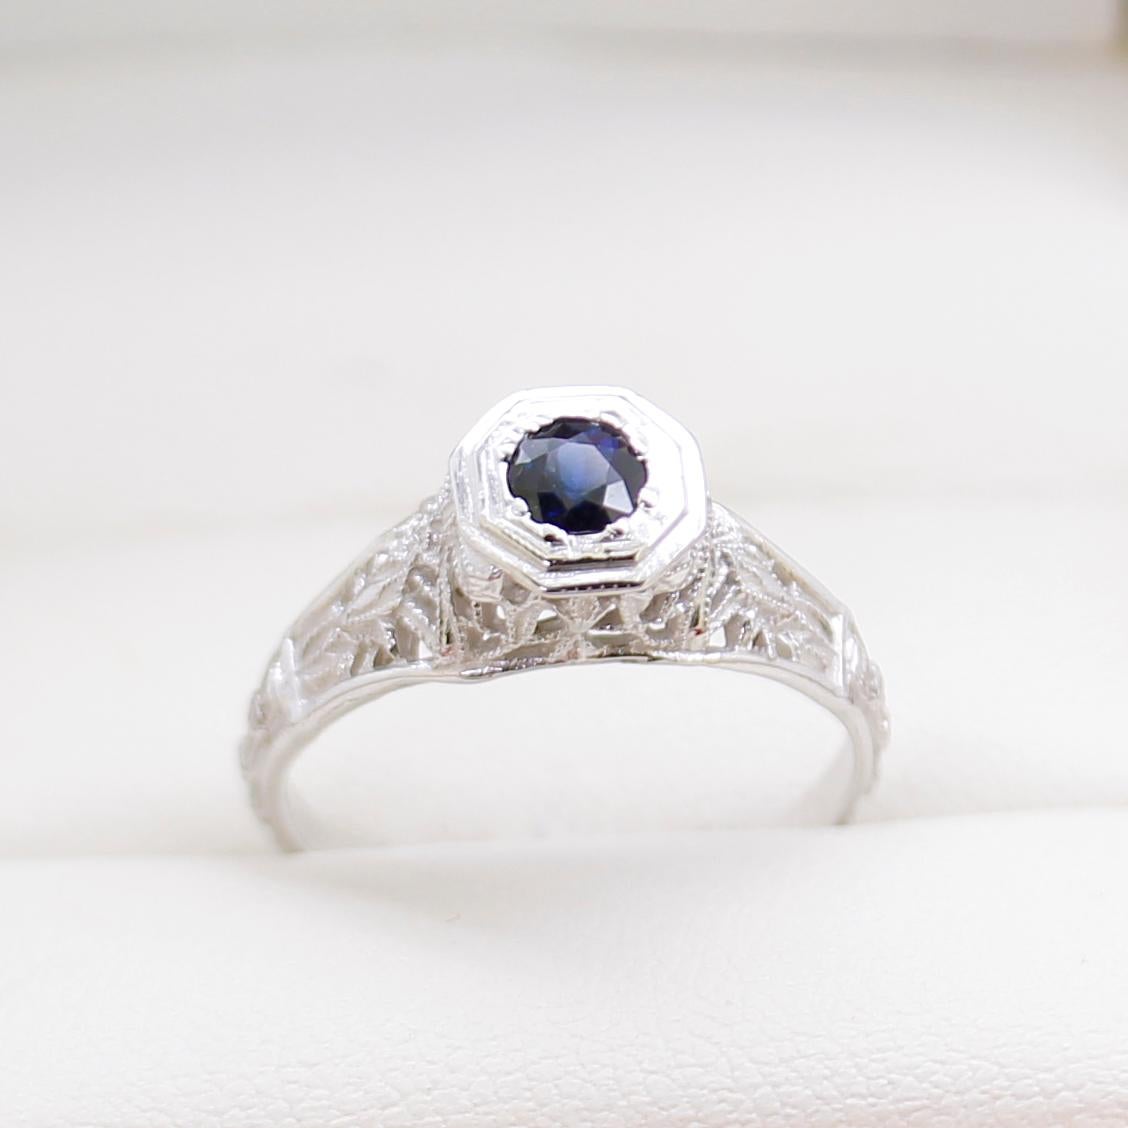 14ct White Gold Ring, narrow, low half round, tapered shank with open back polished finish, stamped (14K).

The Ring Contains:

One claw set round natural blue sapphire, colour is 